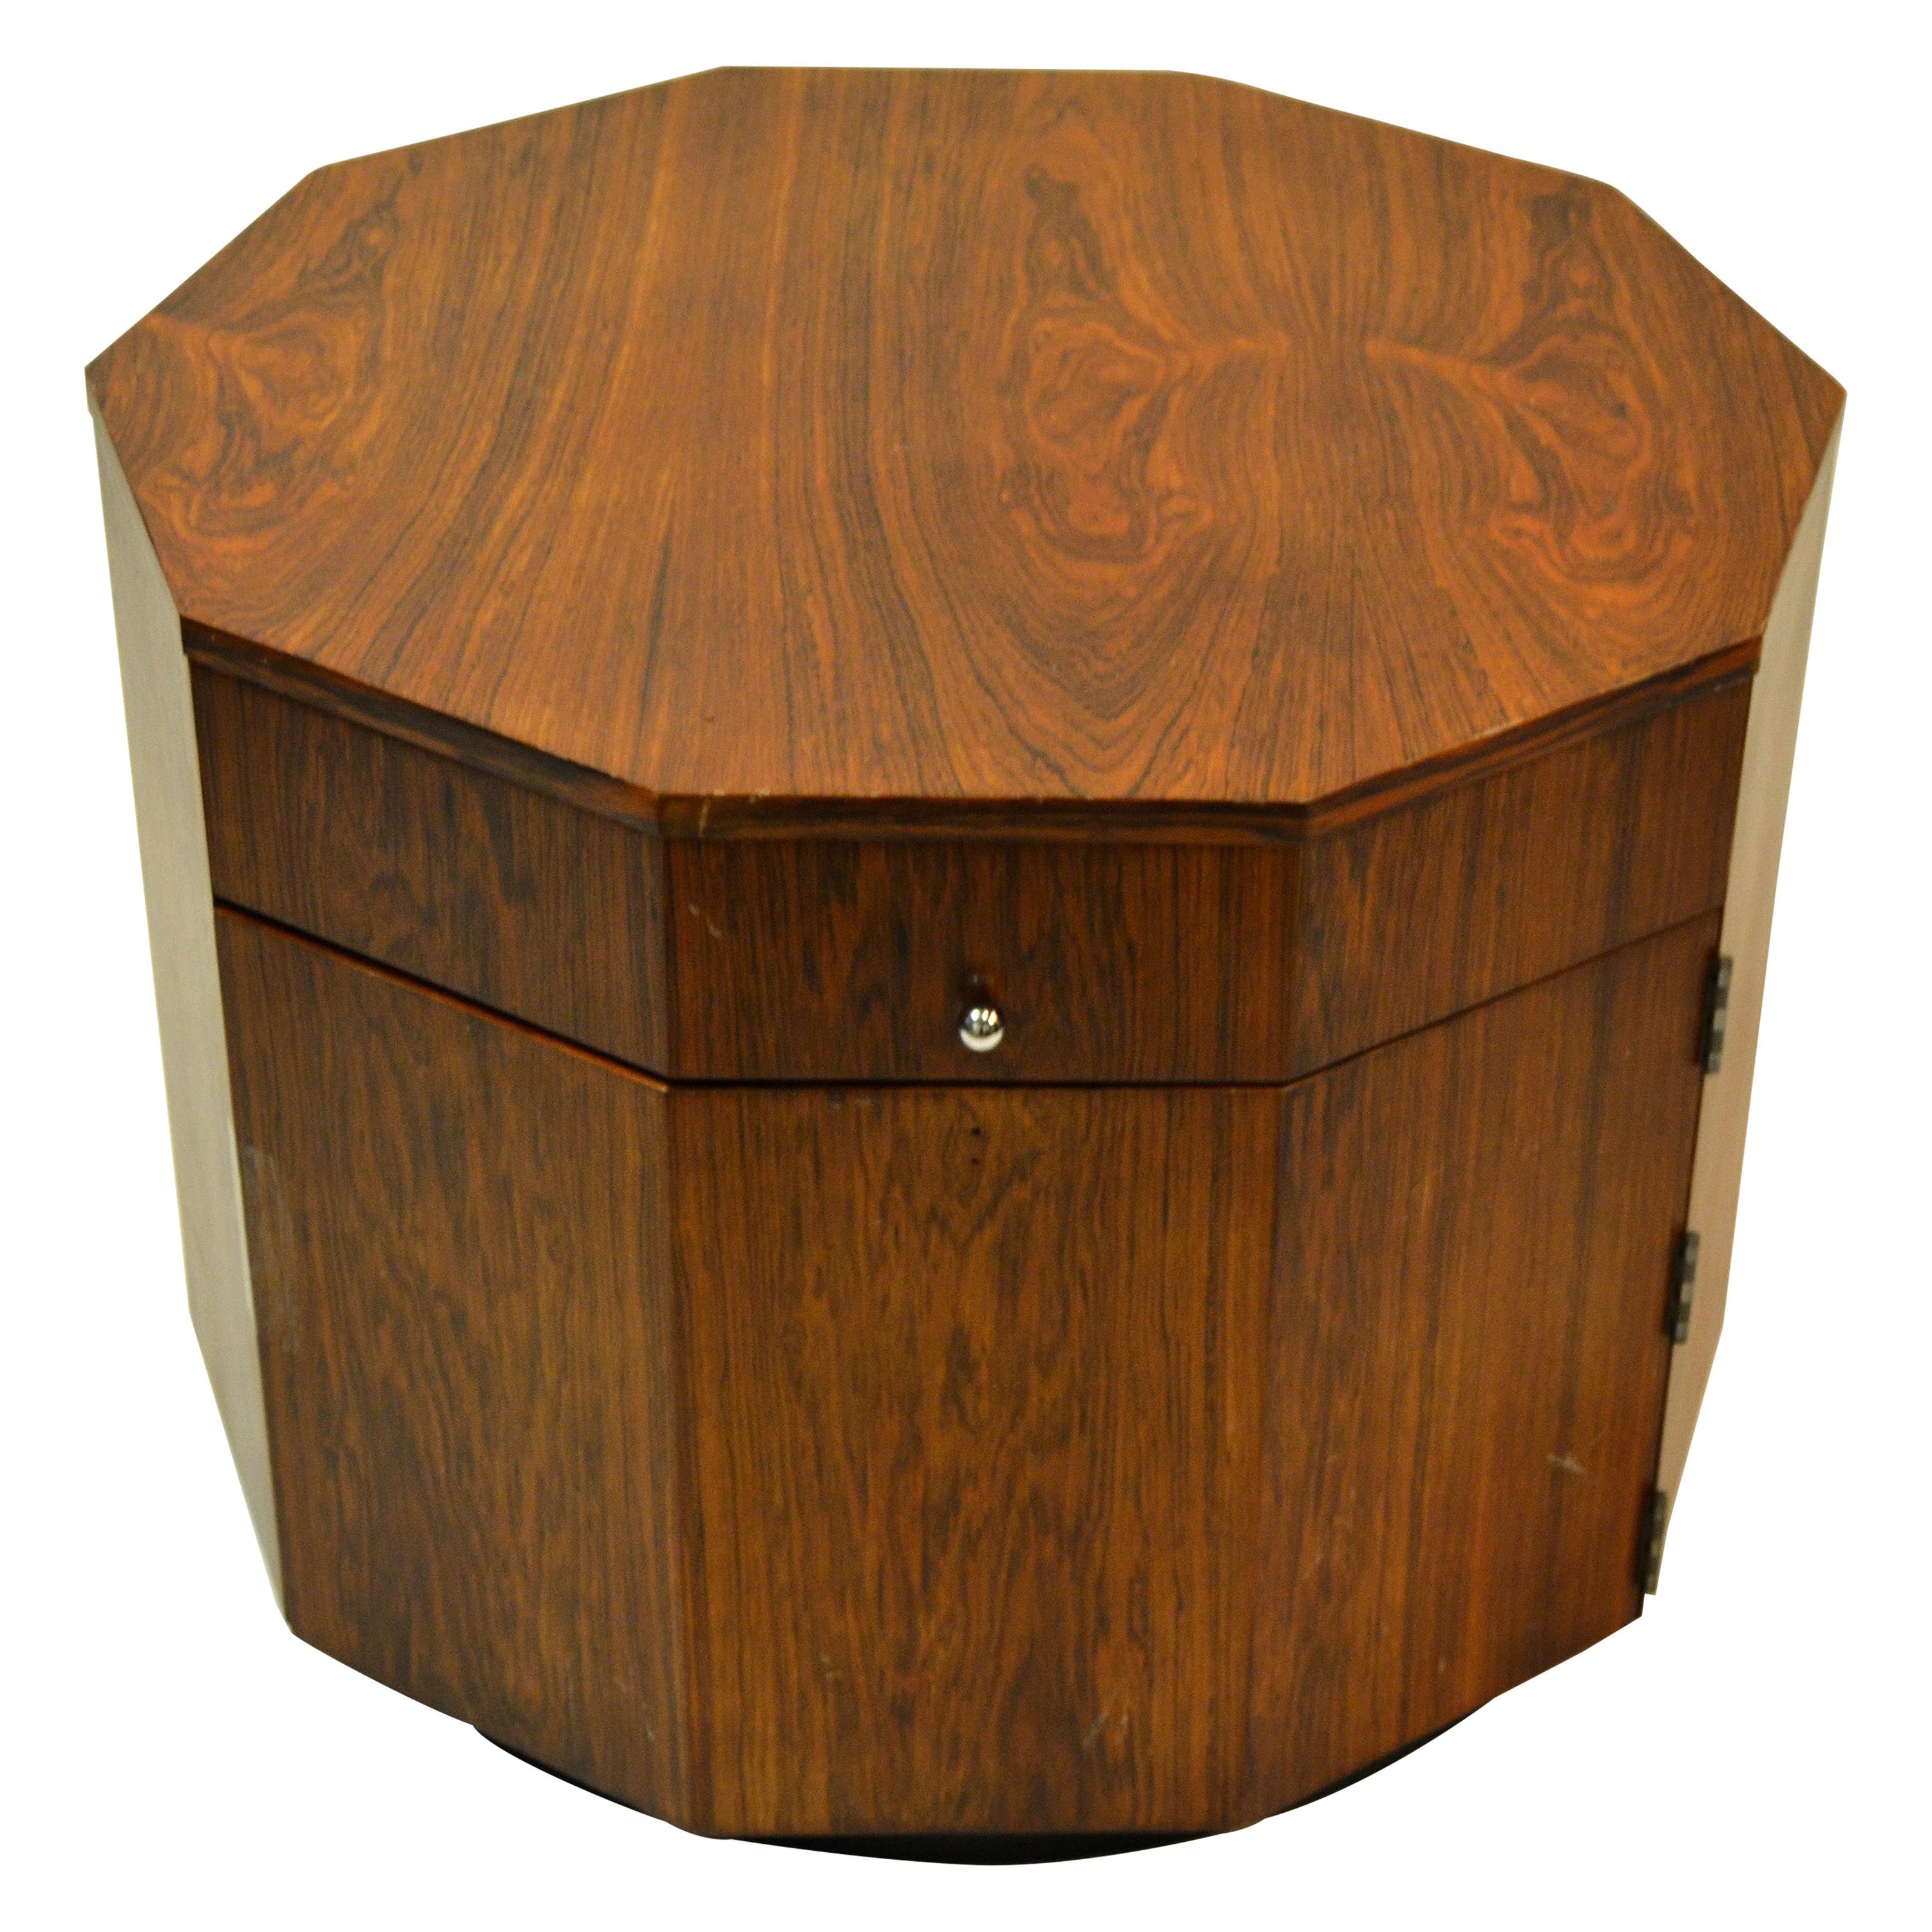 Harvey Probber Mid-Century Modern Octagonal Occasional Rosewood Table / Cabinet